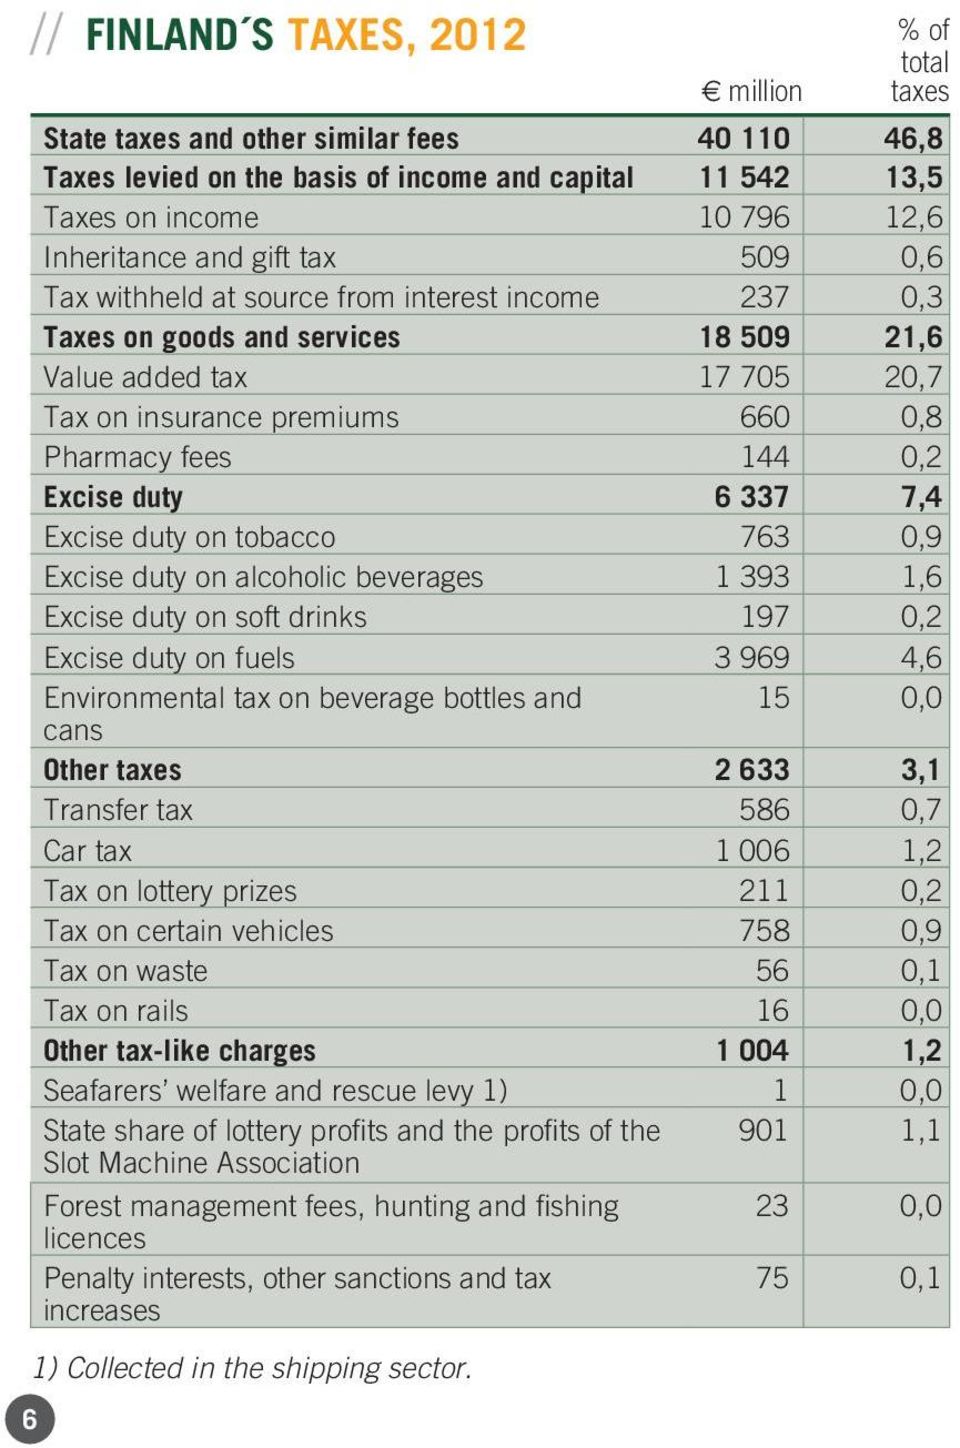 Excise duty 6 337 7,4 Excise duty on tobacco 763 0,9 Excise duty on alcoholic beverages 1 393 1,6 Excise duty on soft drinks 197 0,2 Excise duty on fuels 3 969 4,6 Environmental tax on beverage